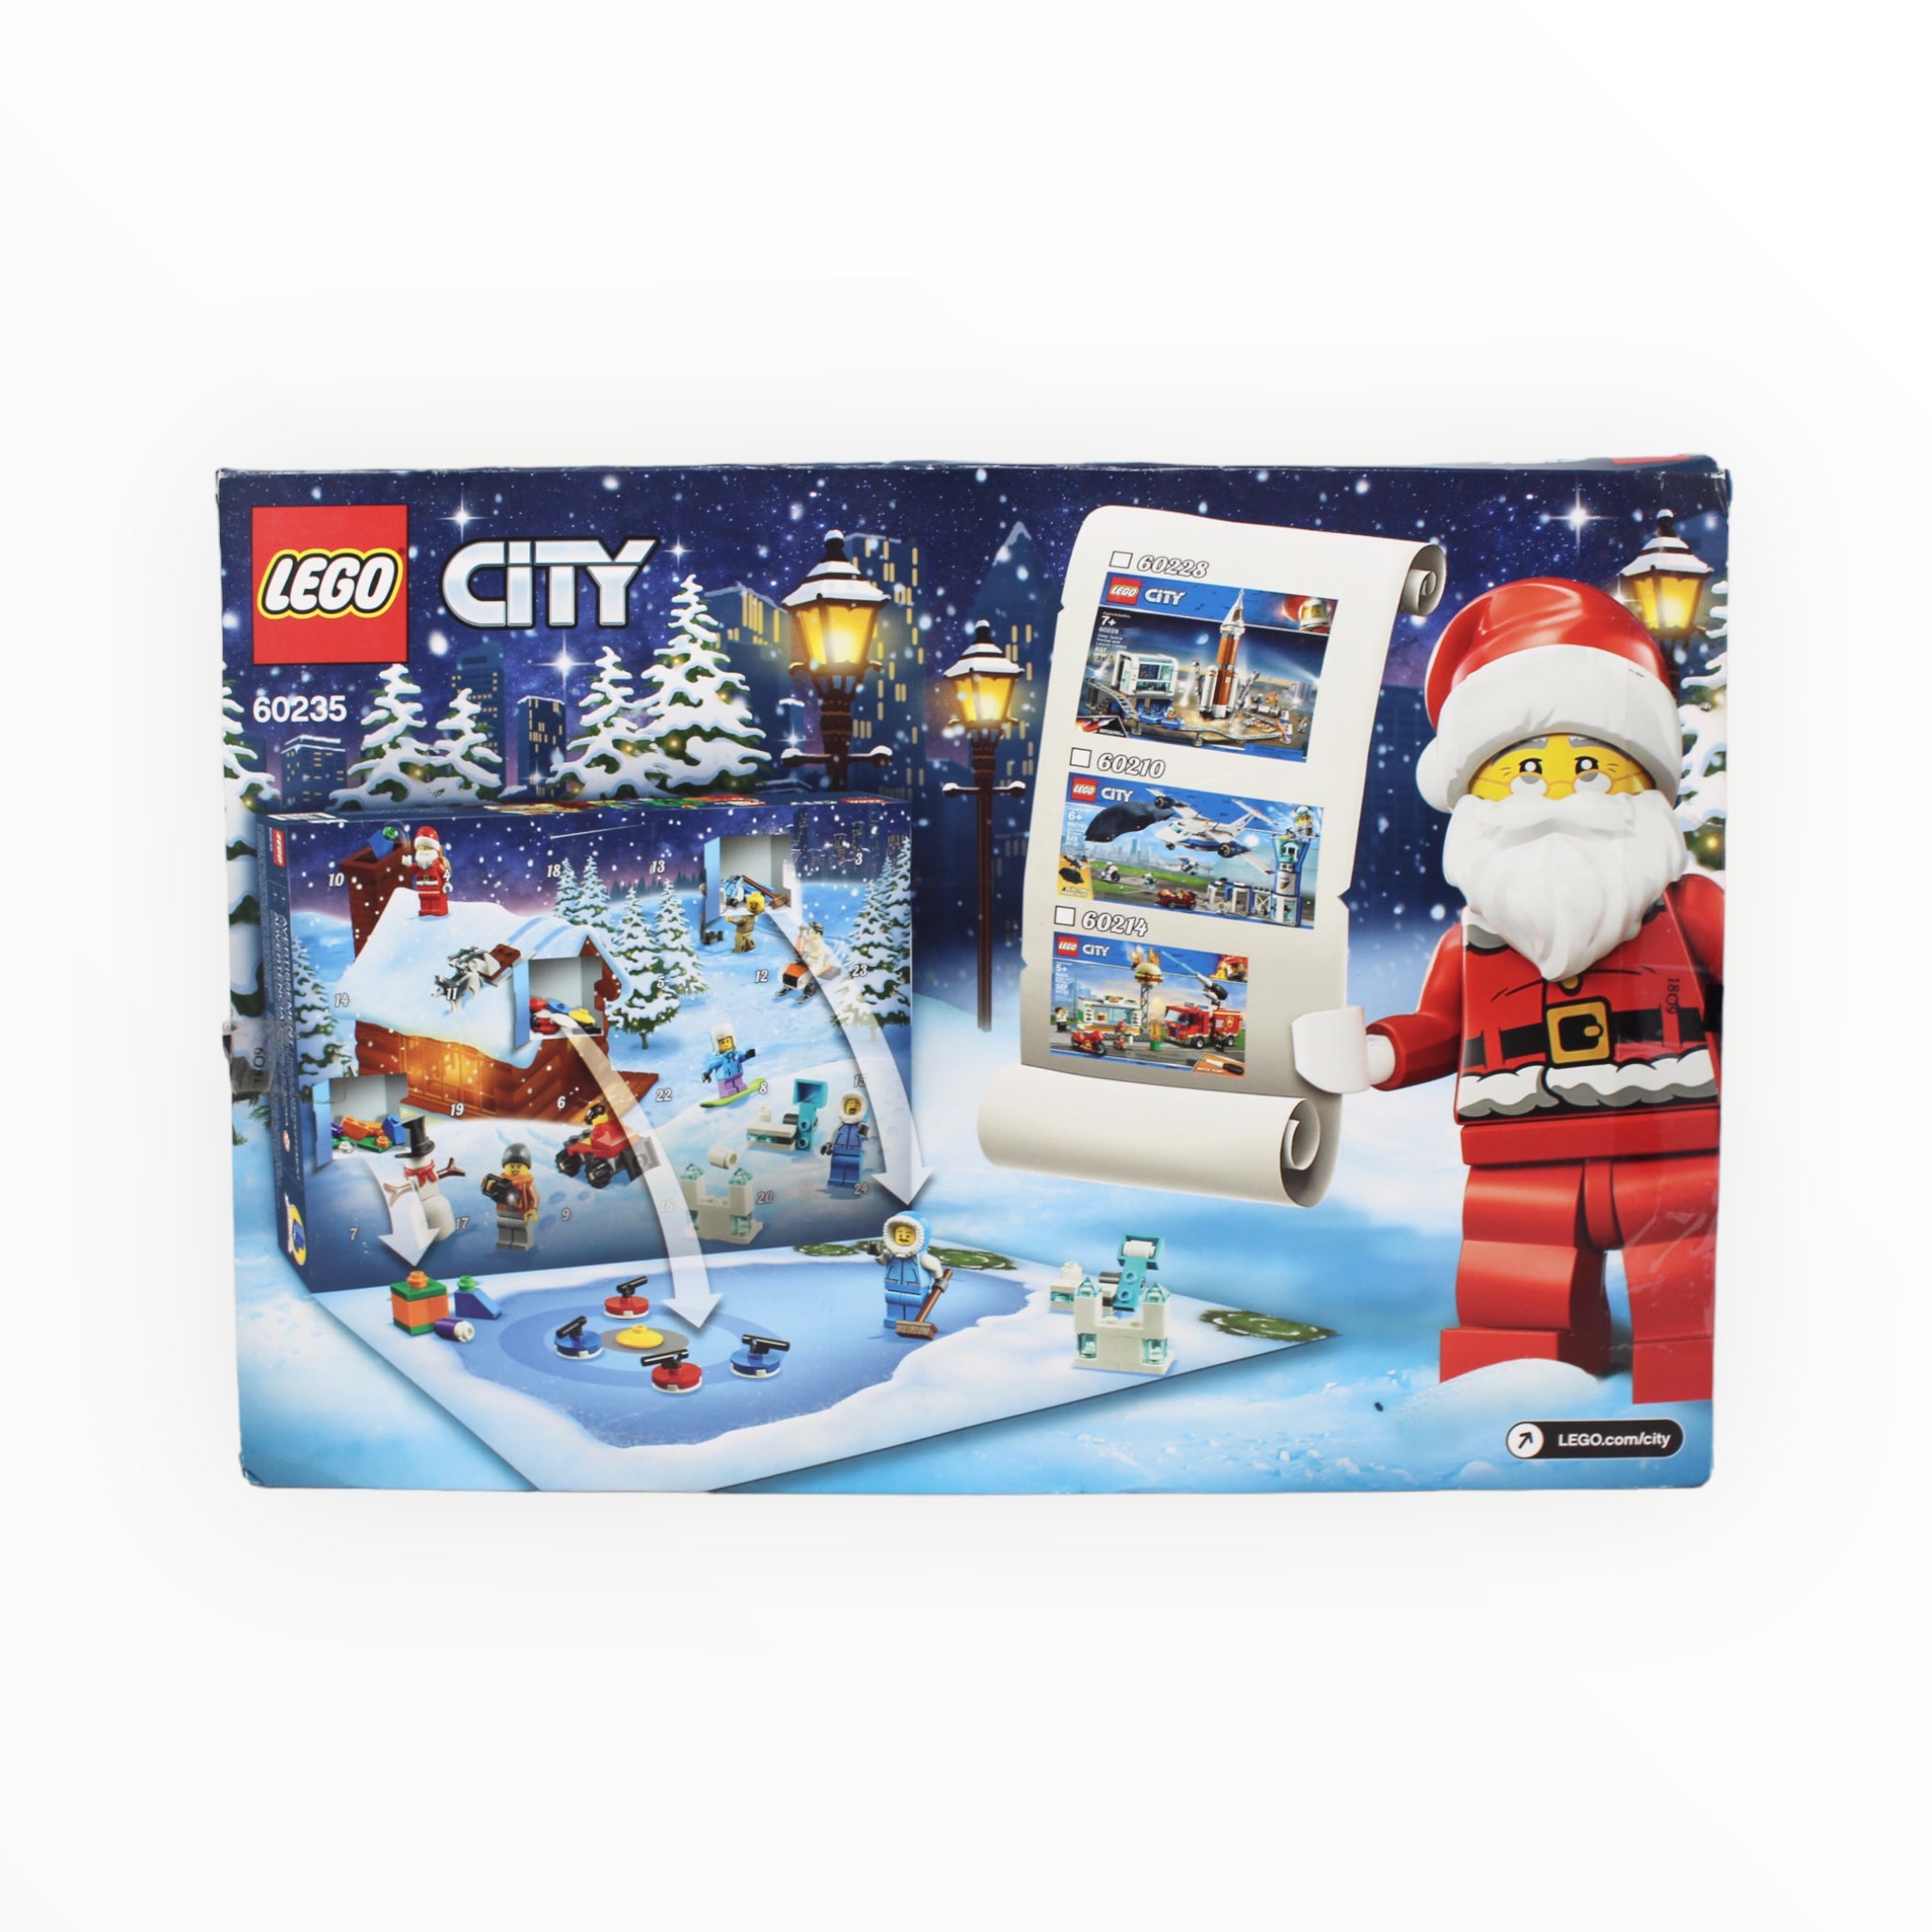 Certified Used Set 60235 City Advent Calendar (2019, open box, sealed bags)